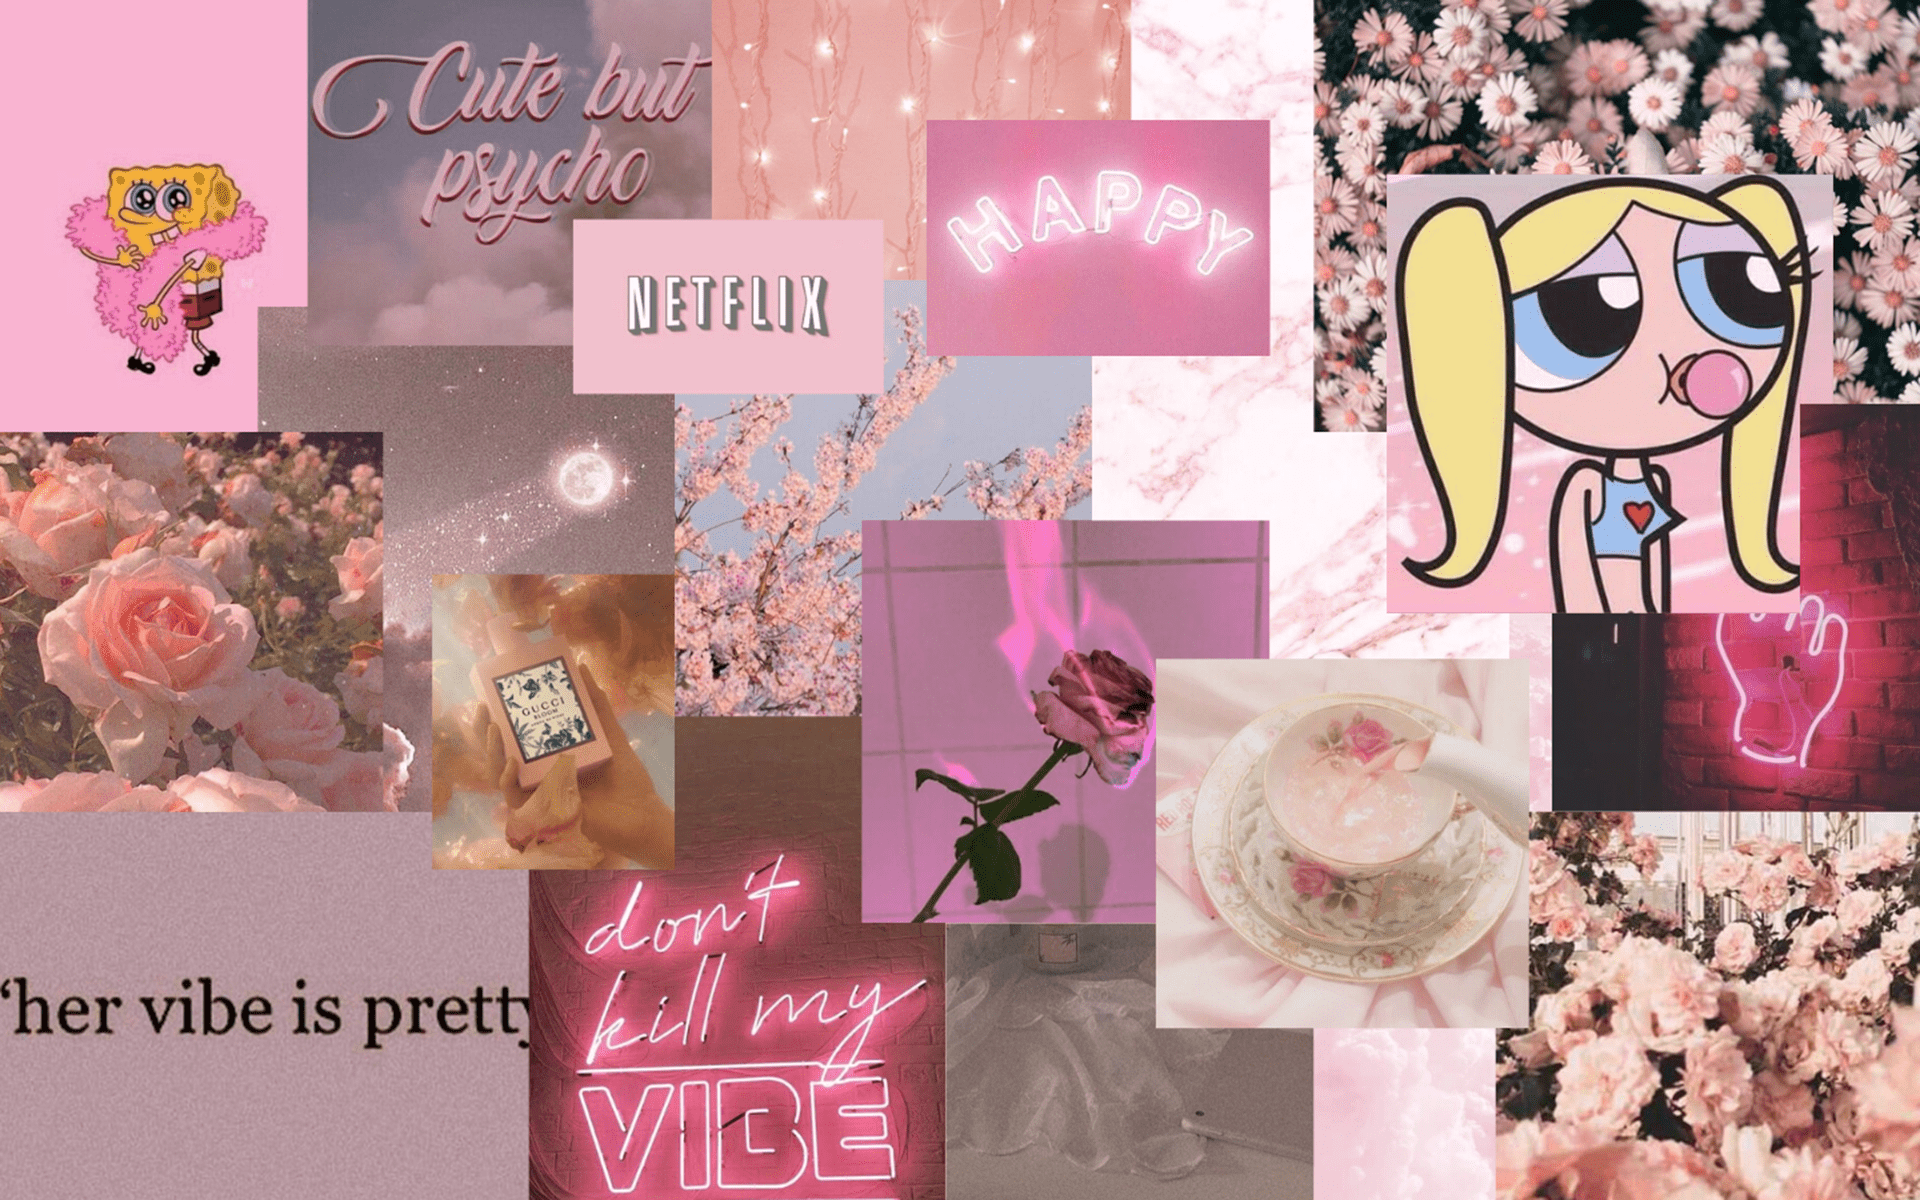 Aesthetic collage background with pink aesthetic images - Netflix, Gucci, pink